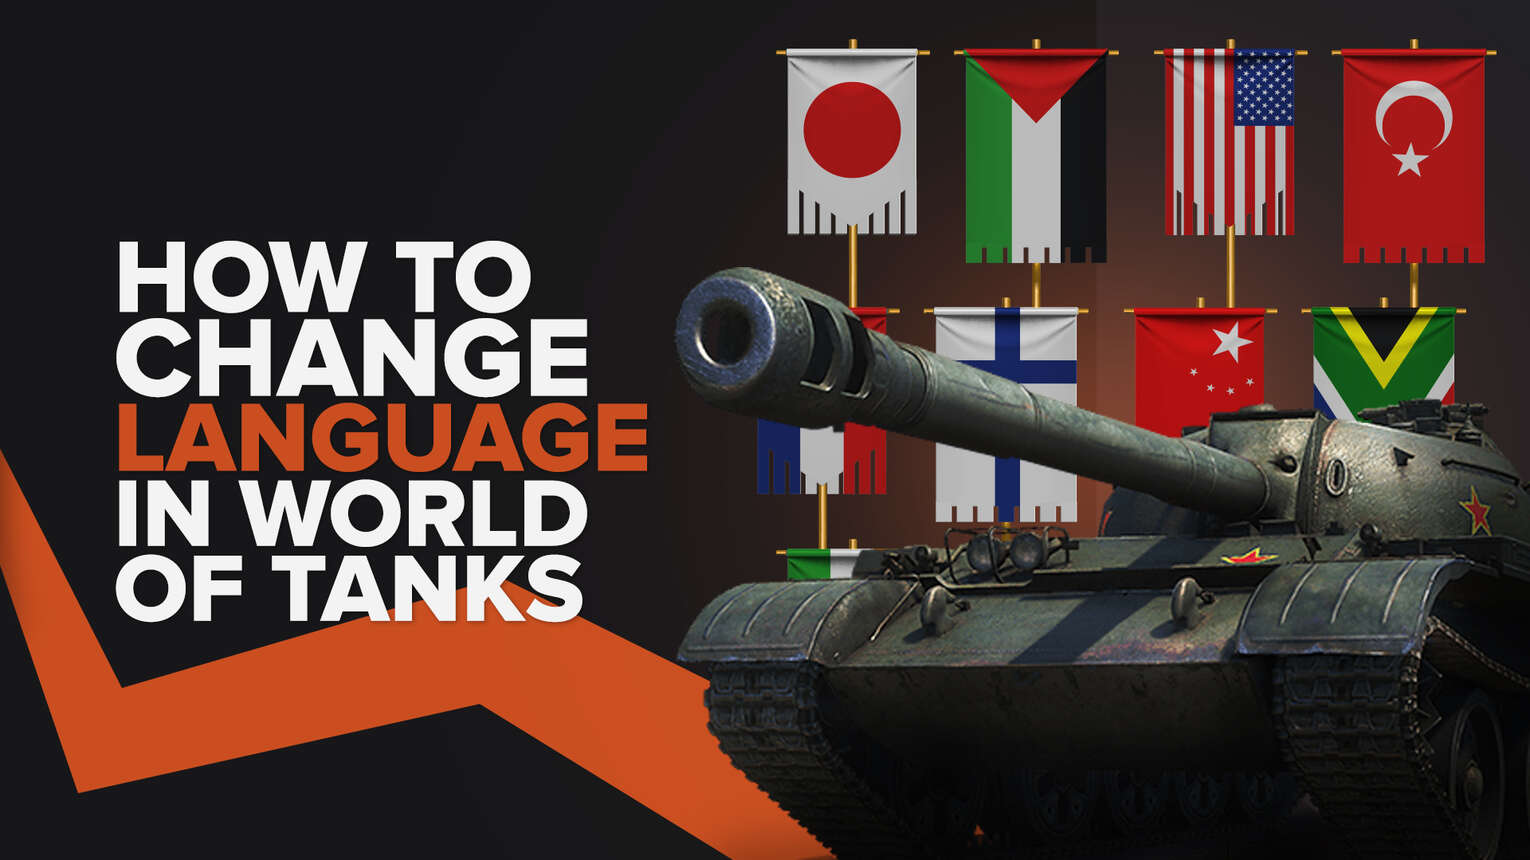 How To Change Language in World of Tanks Easily